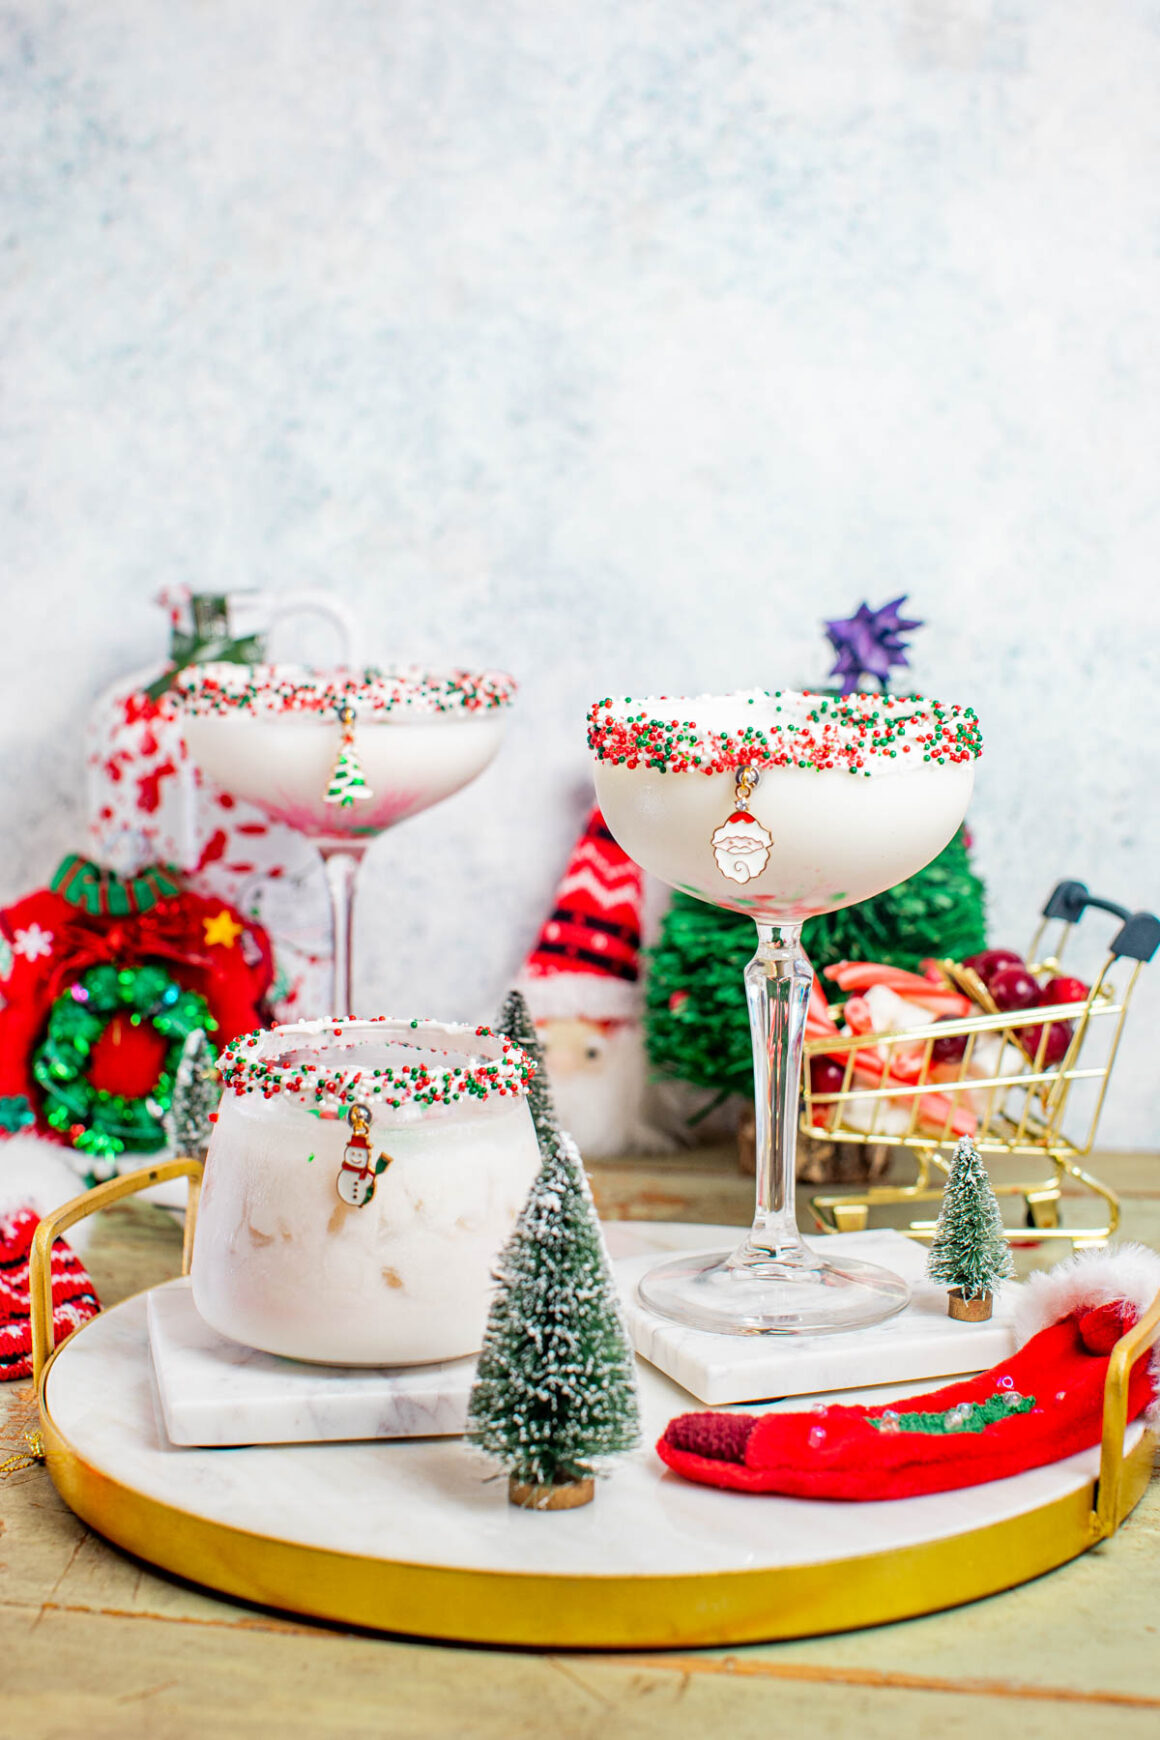 Indulging in a Sugar Cookie Martini is like capturing the essence of the holiday season in a glass.